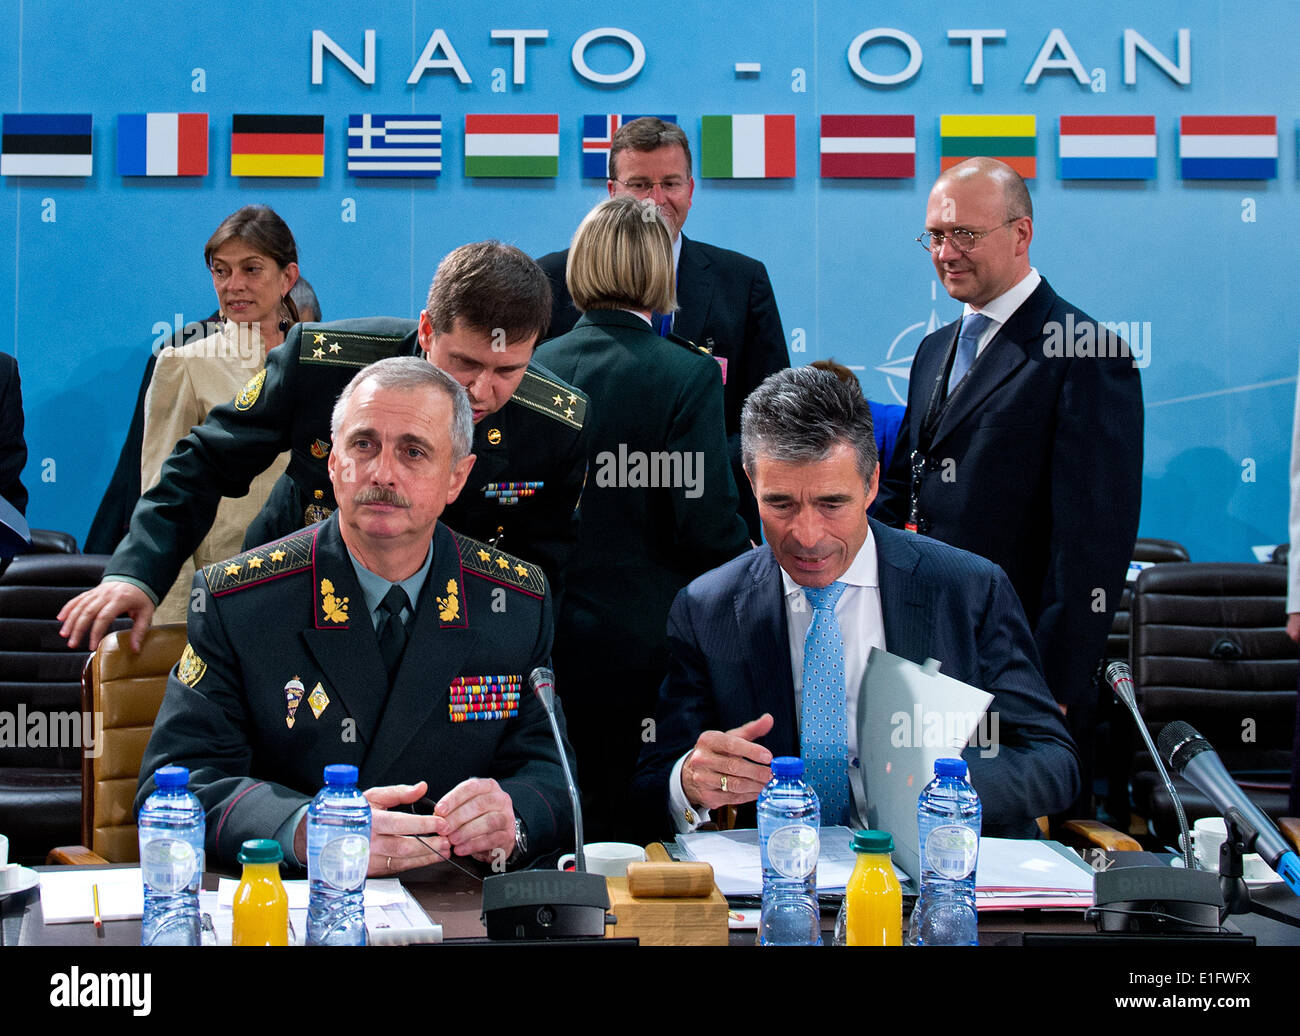 Brussels, Belgium. 03rd June, 2014. NATO Secretary General Anders Fogh Rasmussen (R) and Ukraine's Defence Minister Mikhail Koval sit during the meeting of NATO defence ministers in Brussels, Belgium, 03 June 2014. The defence ministers of the 28 member states of NATO discuss a stronger military presence in the east-European member states in light of the current crisis in the Ukraine. Photo: BERND VON JUTRCZENKA/DPA/Alamy Live News Stock Photo